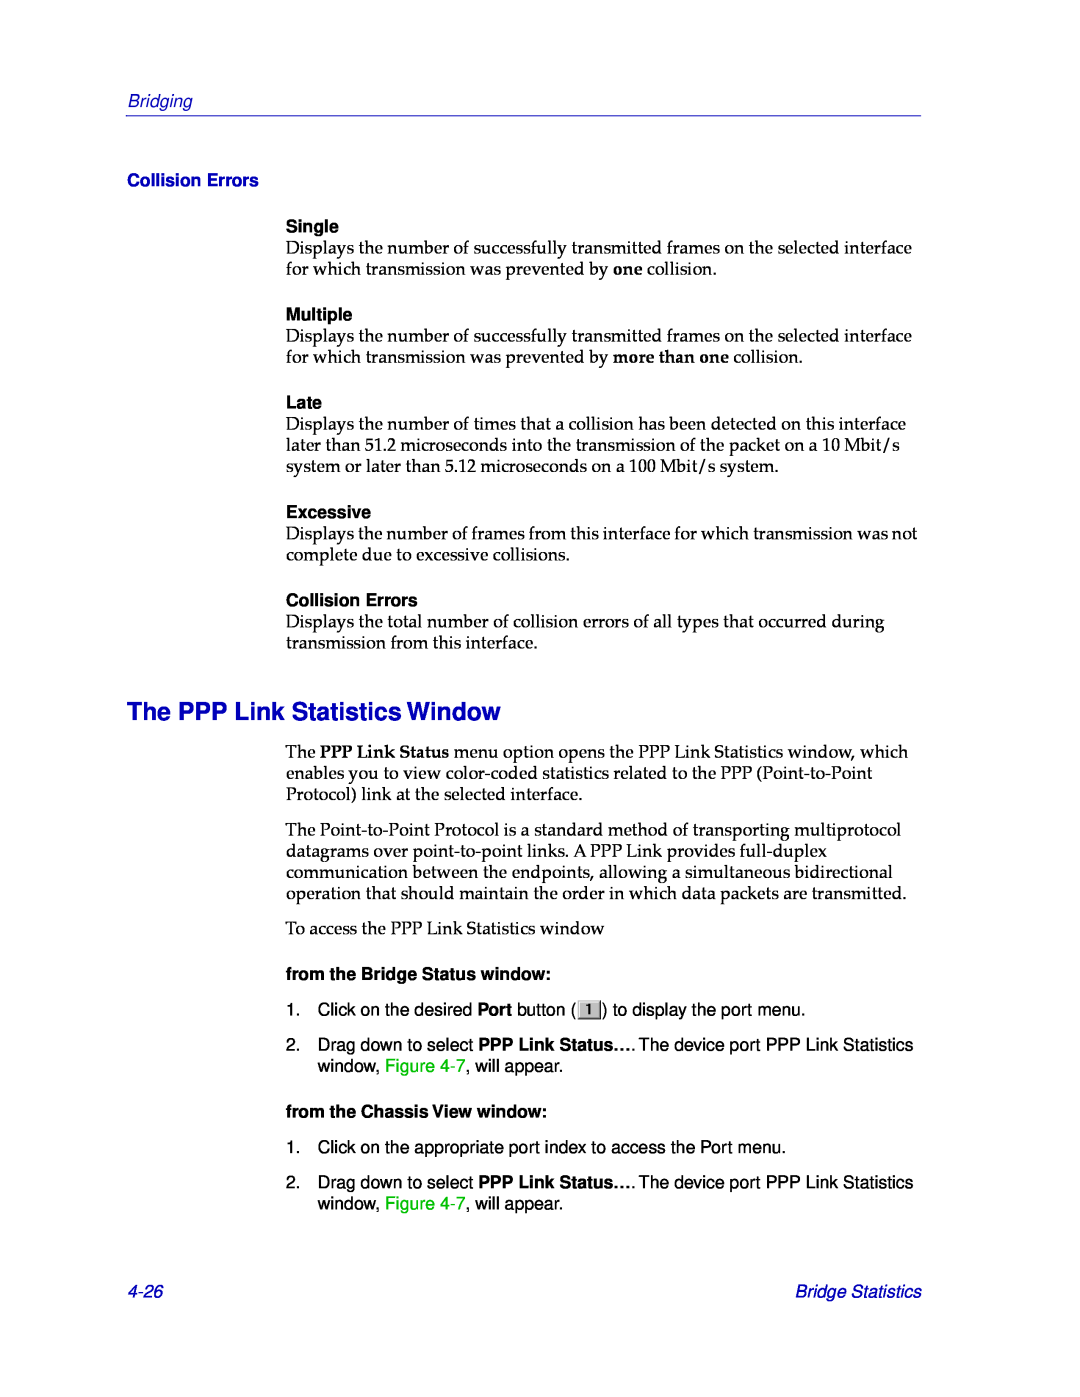 Cabletron Systems CSX400, CSX200 The PPP Link Statistics Window, Collision Errors, Single, Multiple, Late, Excessive, 4-26 